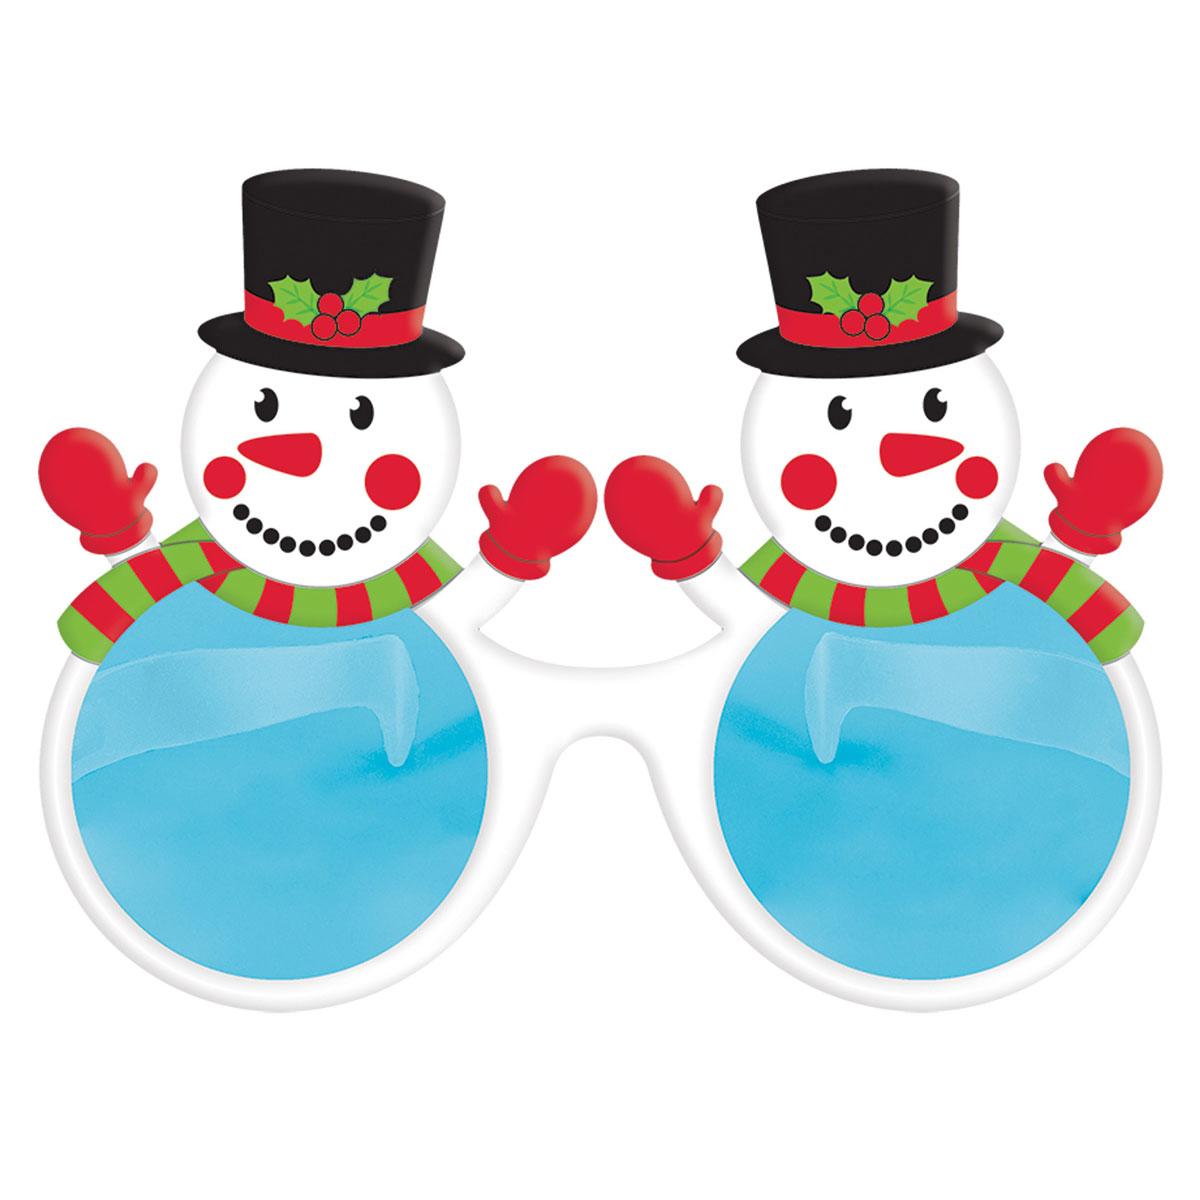 Giant Snowman Glasses 20cm x 15cm - Novelty Christmas Specs by Amscan 398933 available here at Karnival Costumes online party shop